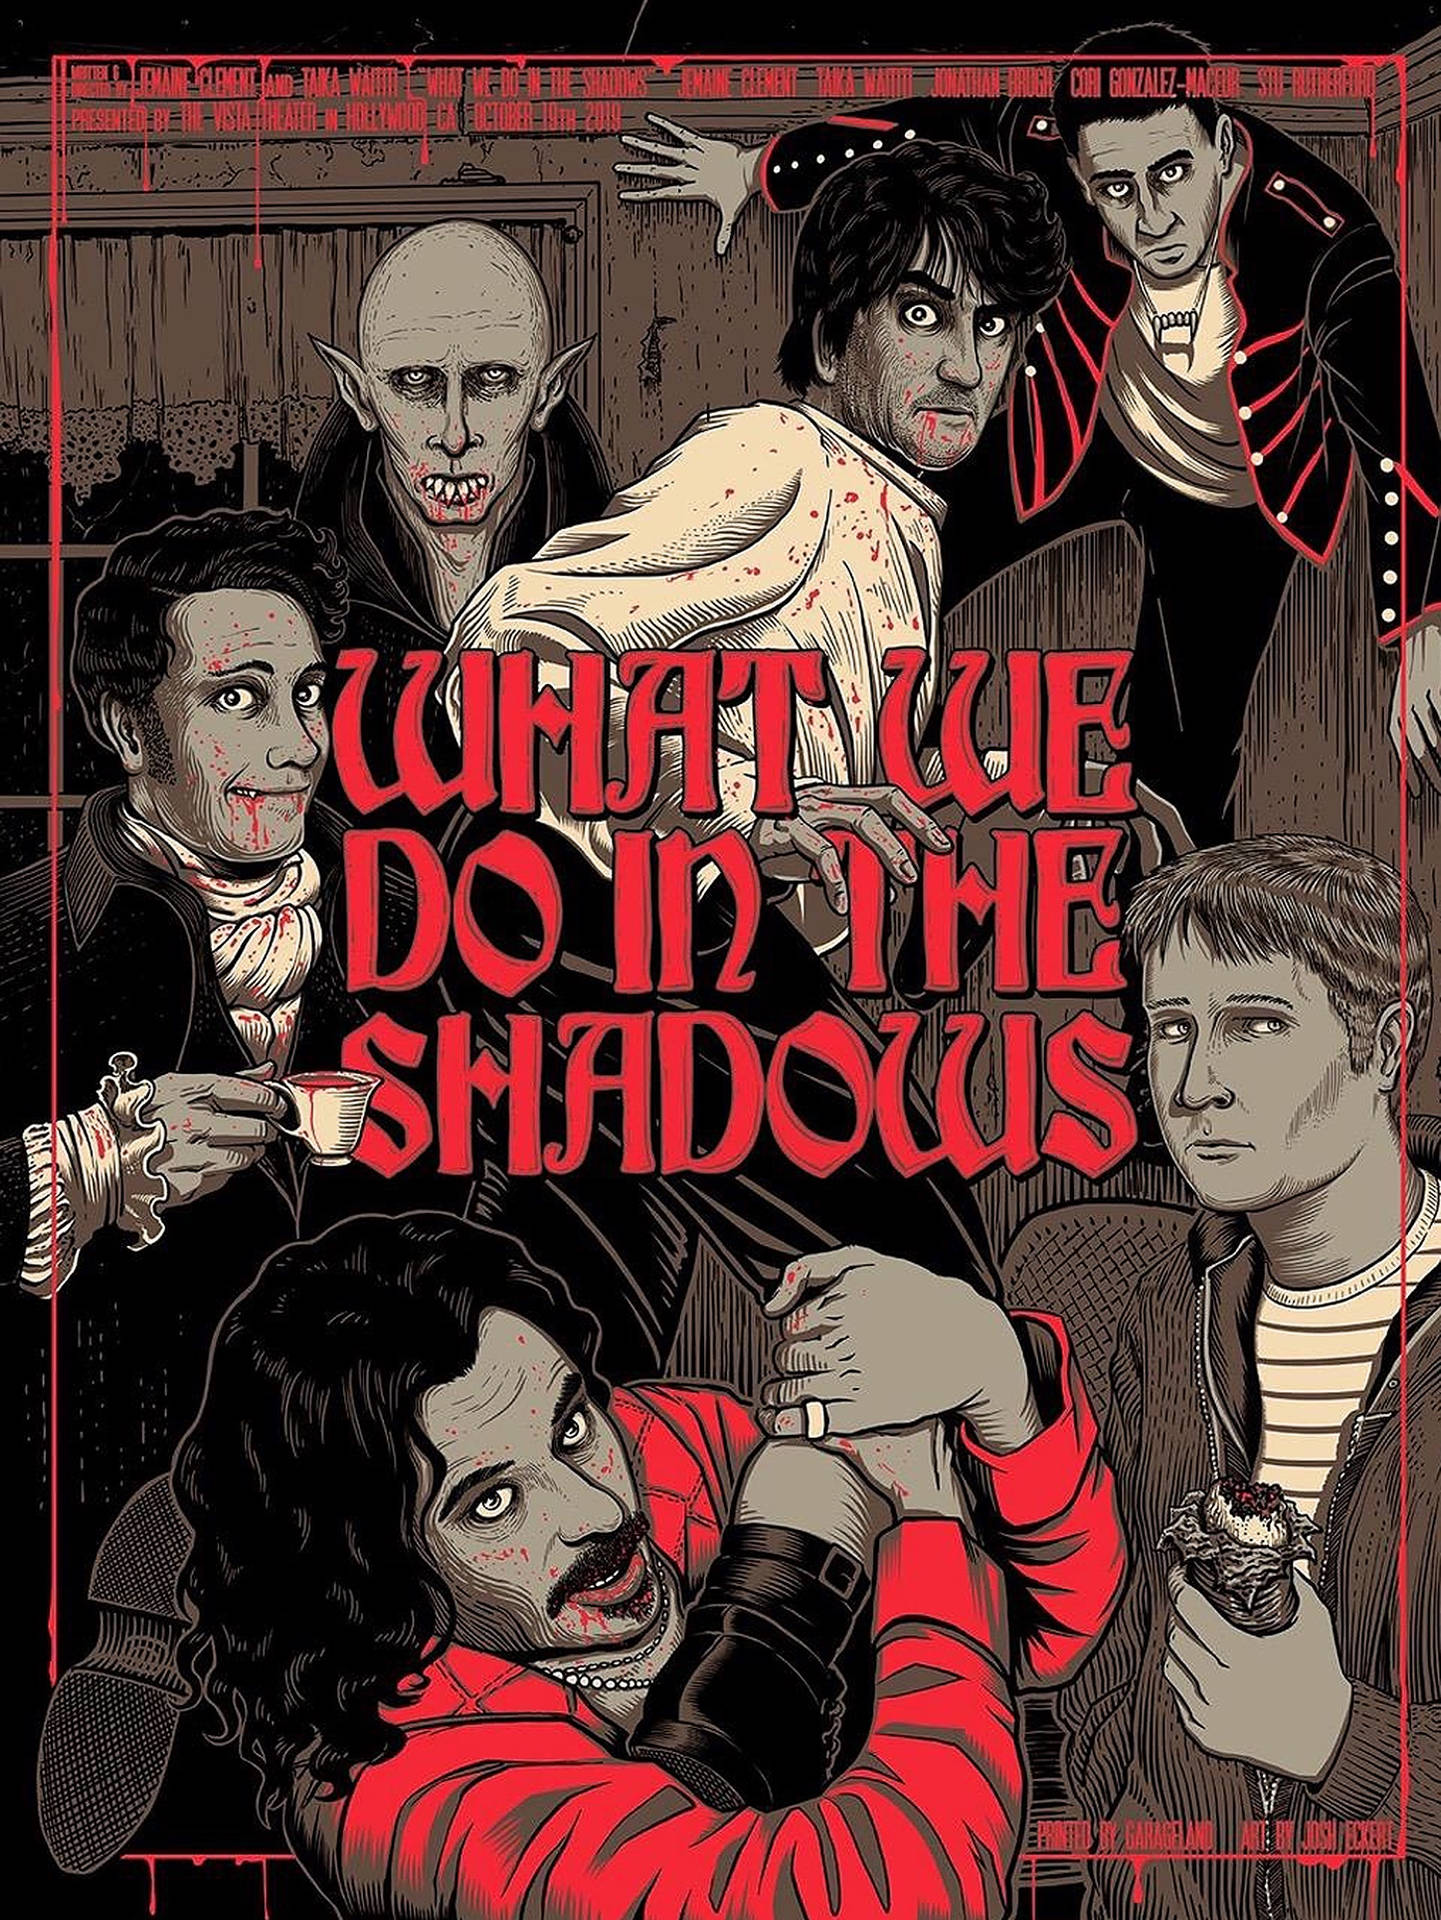 What We Do In The Shadows Poster Art Background